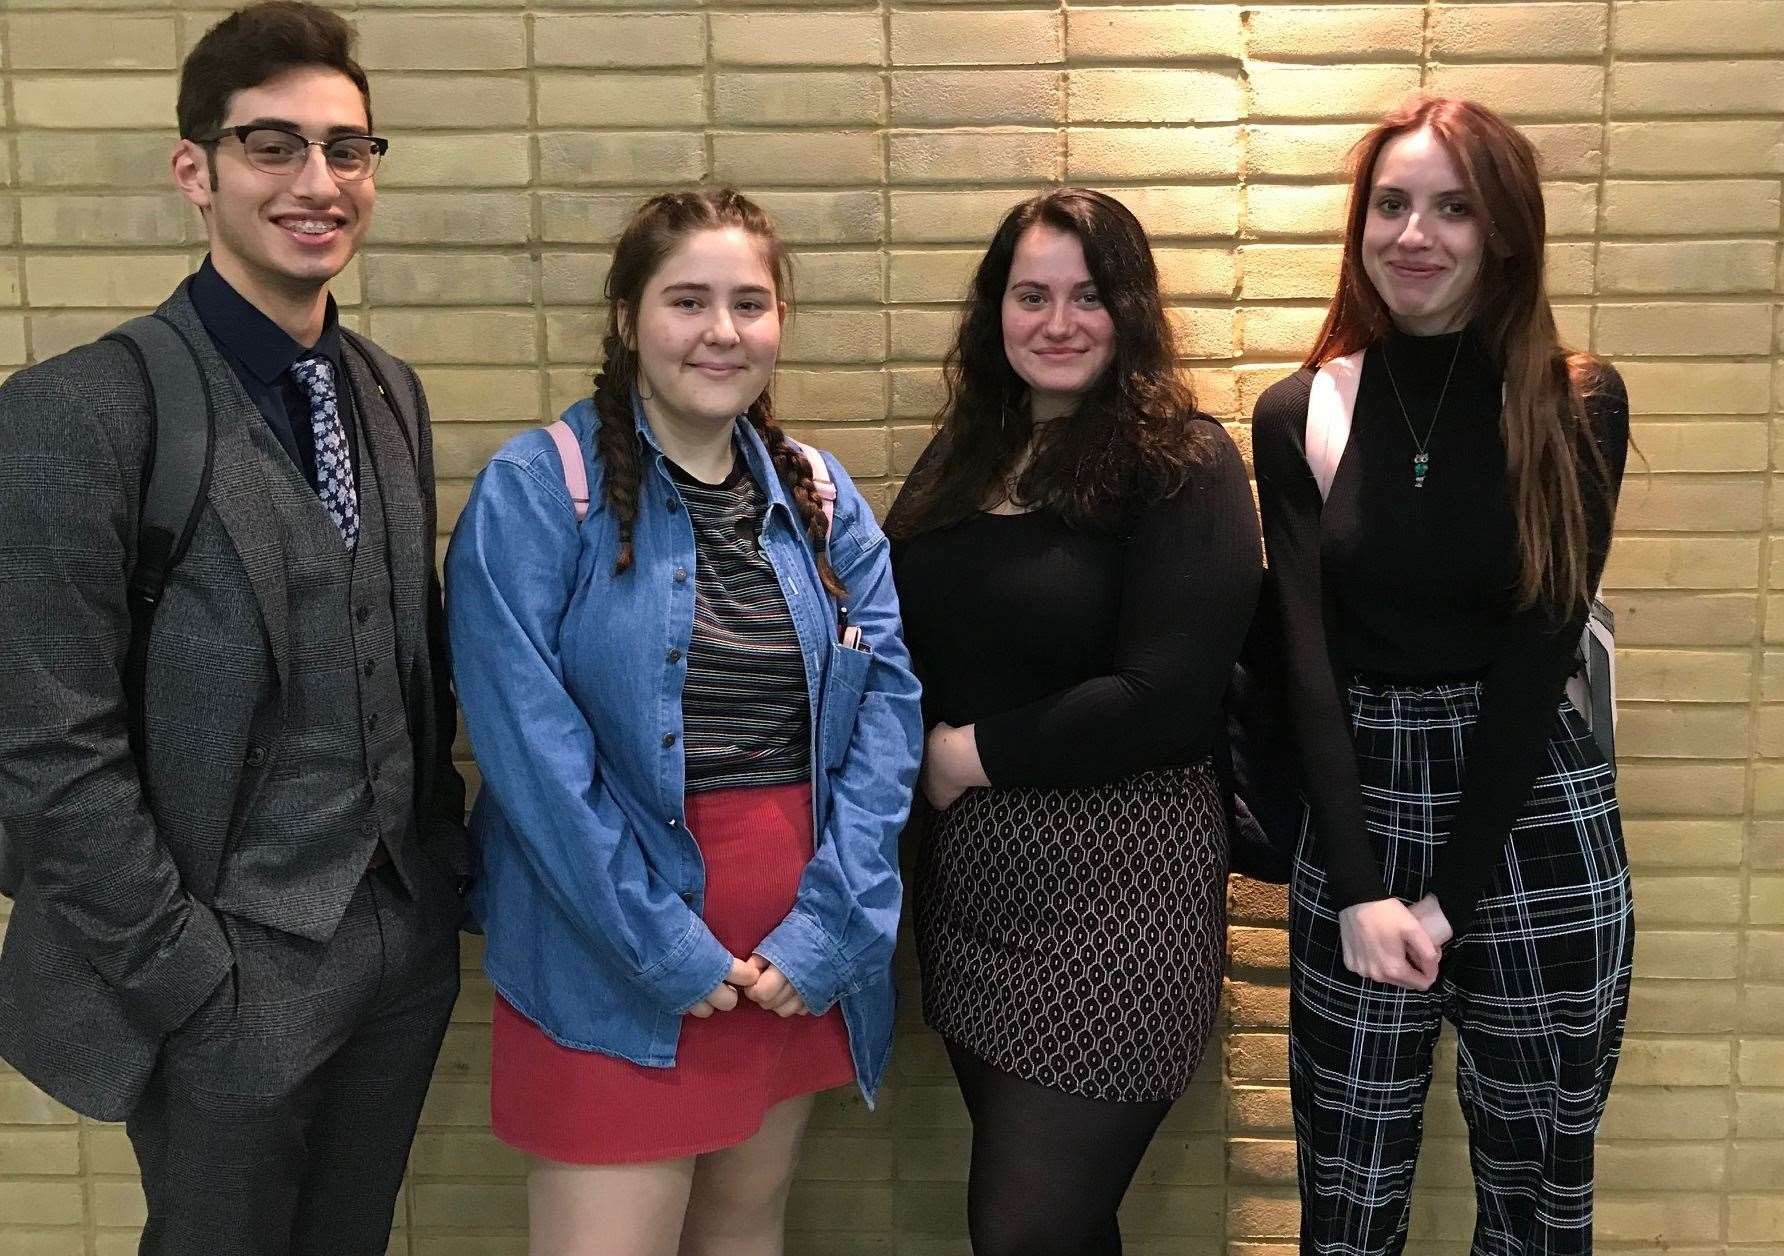 The academy sixth formers who helped save the day - Elliot Cattley, Sophie Lissenden, Olivia Wallbridge and Kayleigh Mills